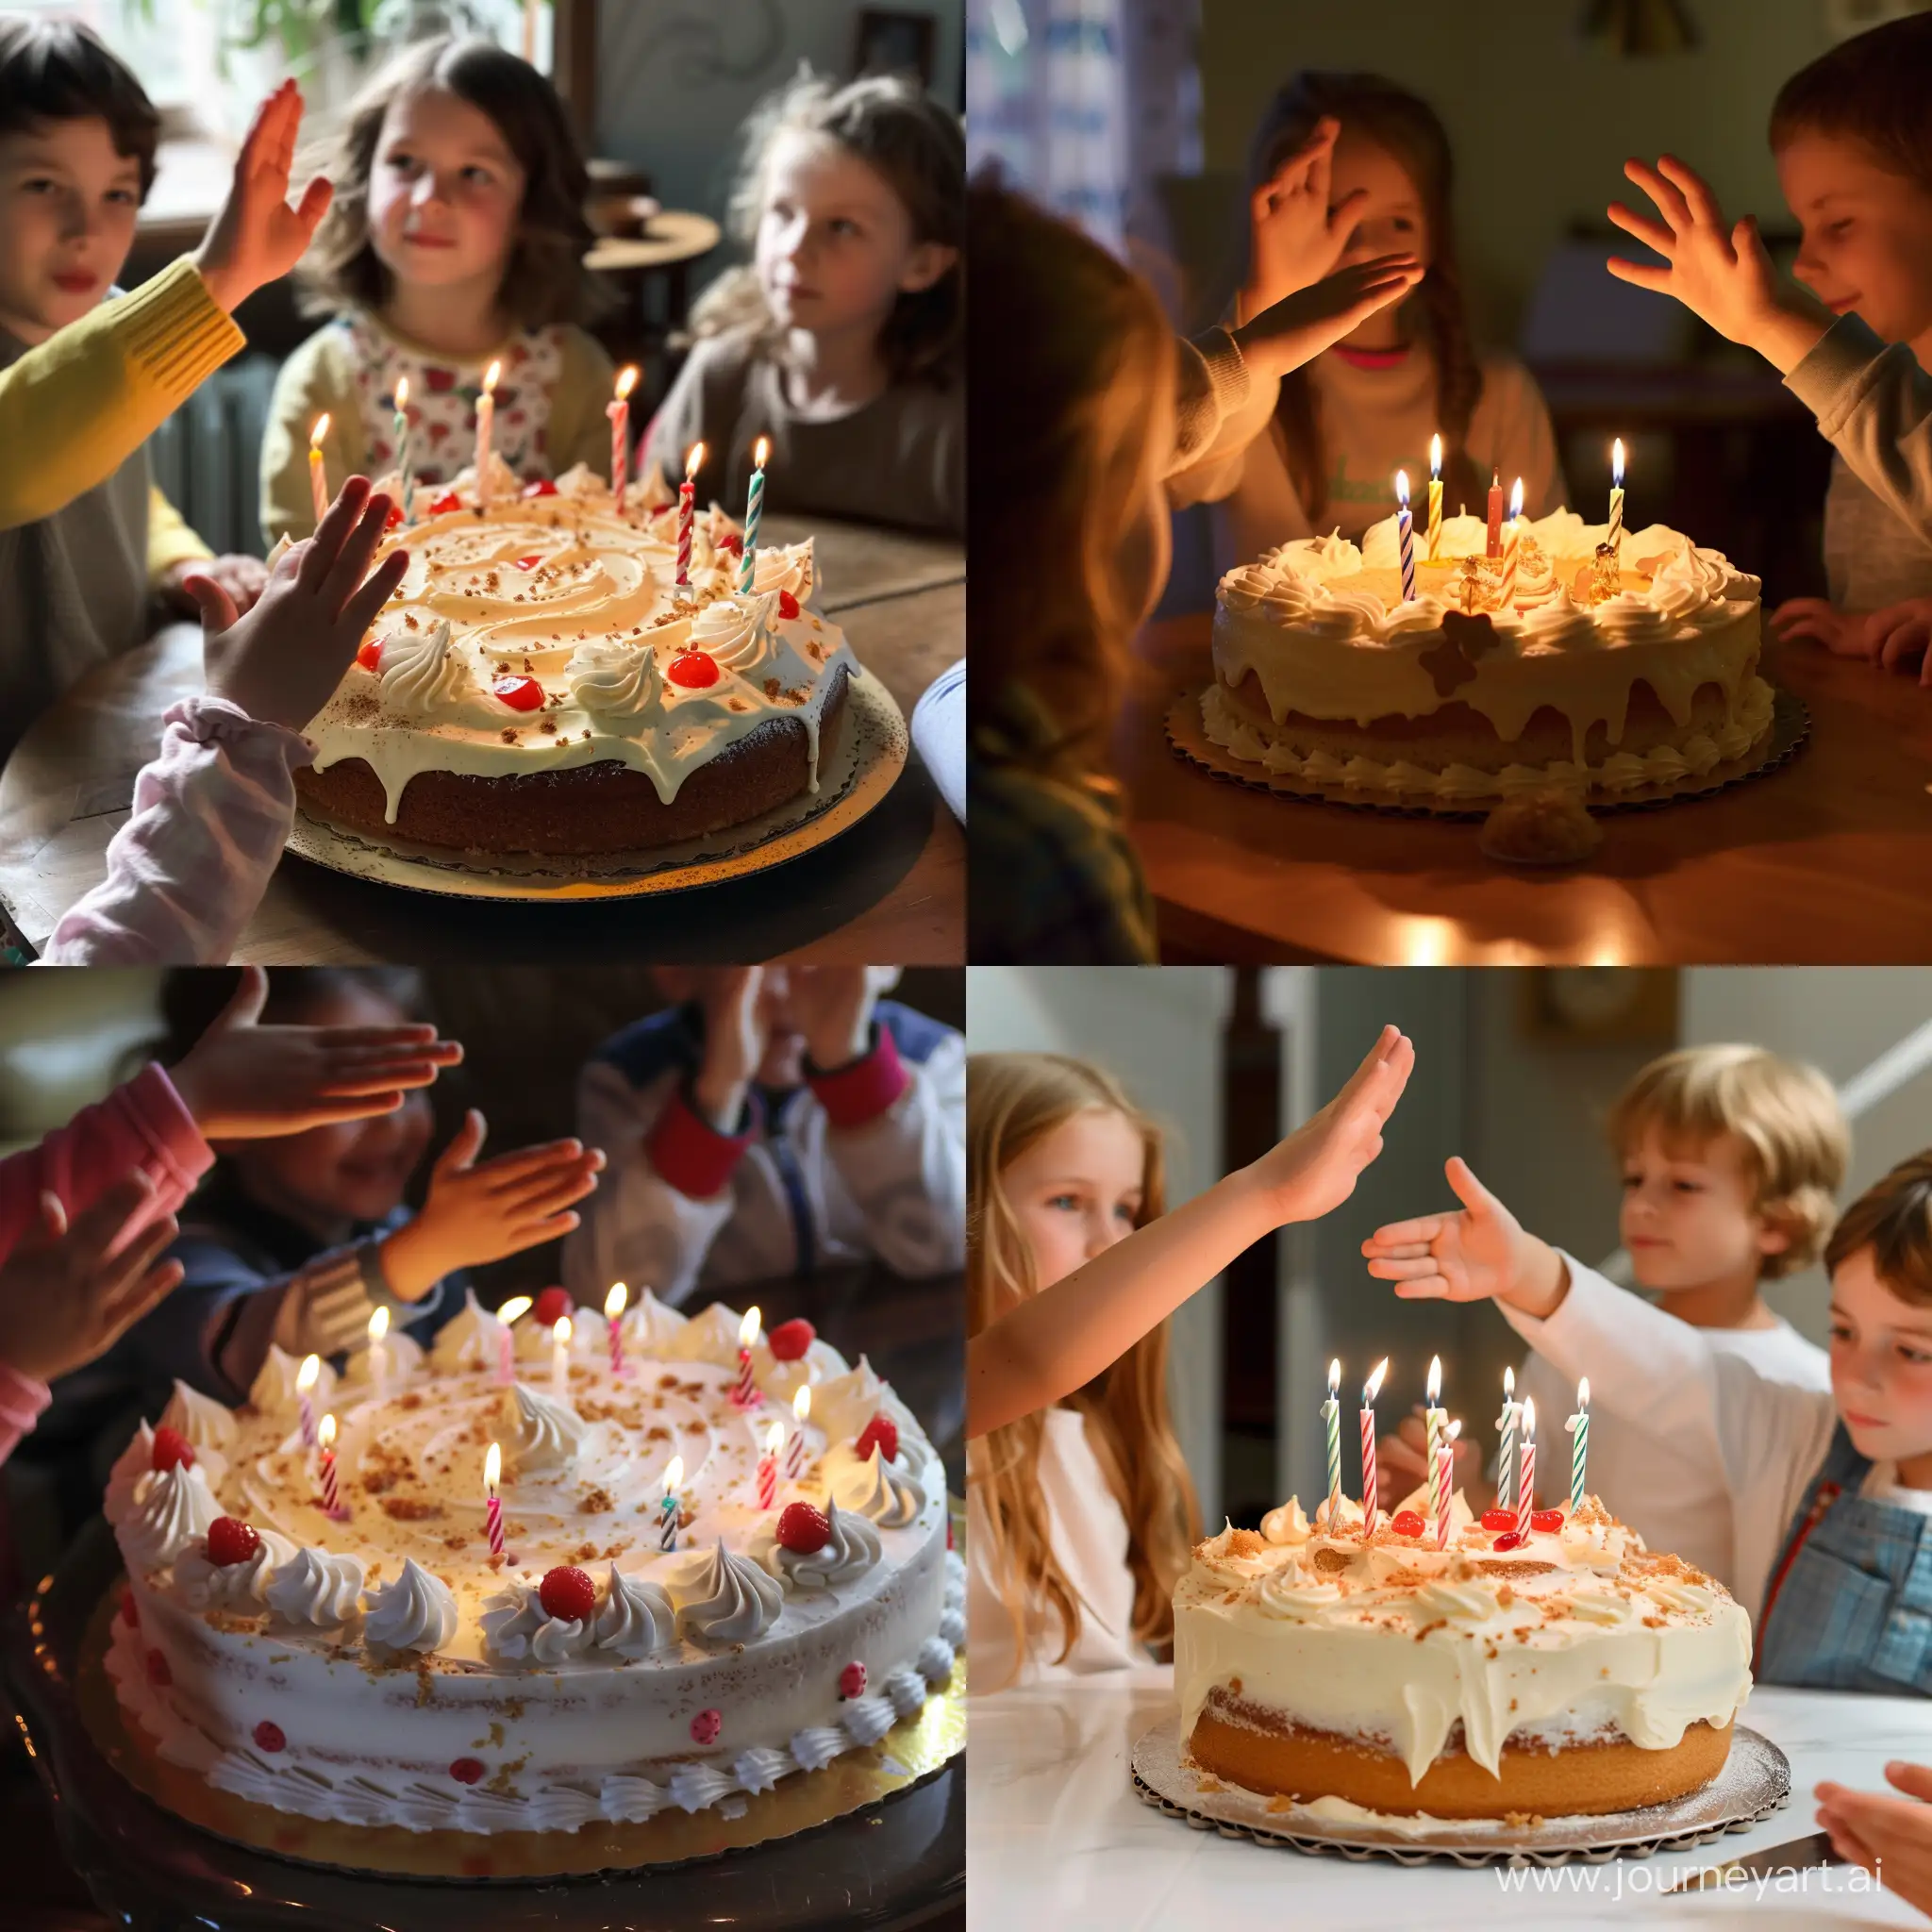 Celebratory-Cake-with-Cream-and-Candles-for-Childrens-Salute